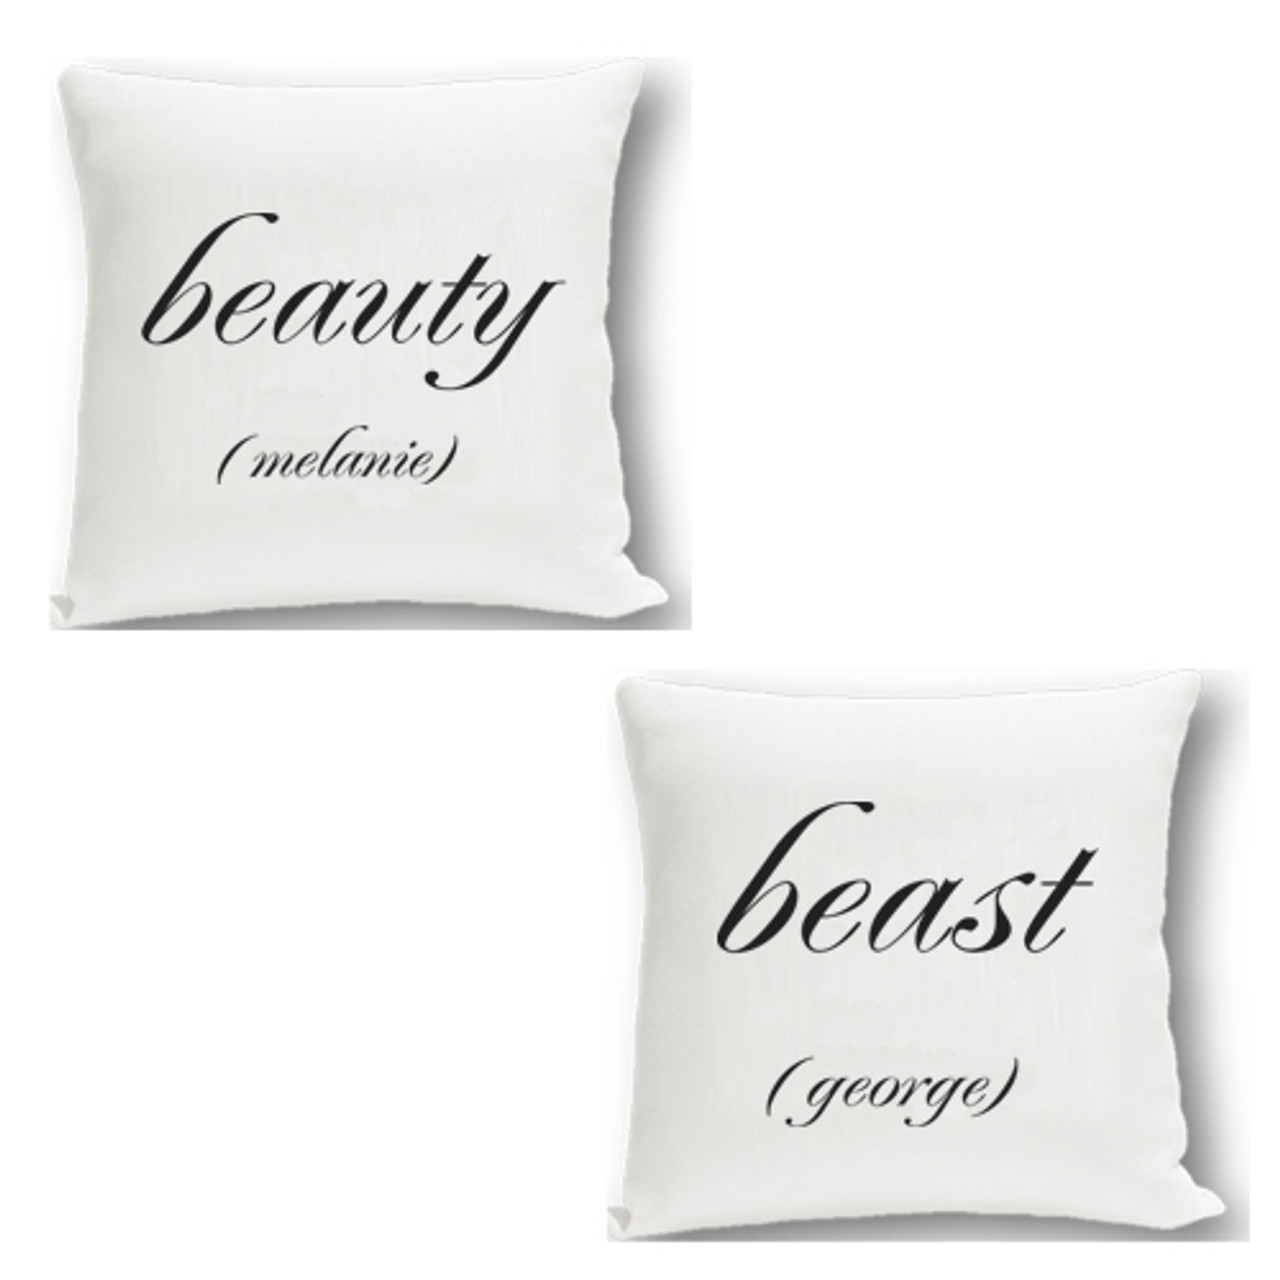 Personalized Beauty & Beast Pillows | Anniversary Gift